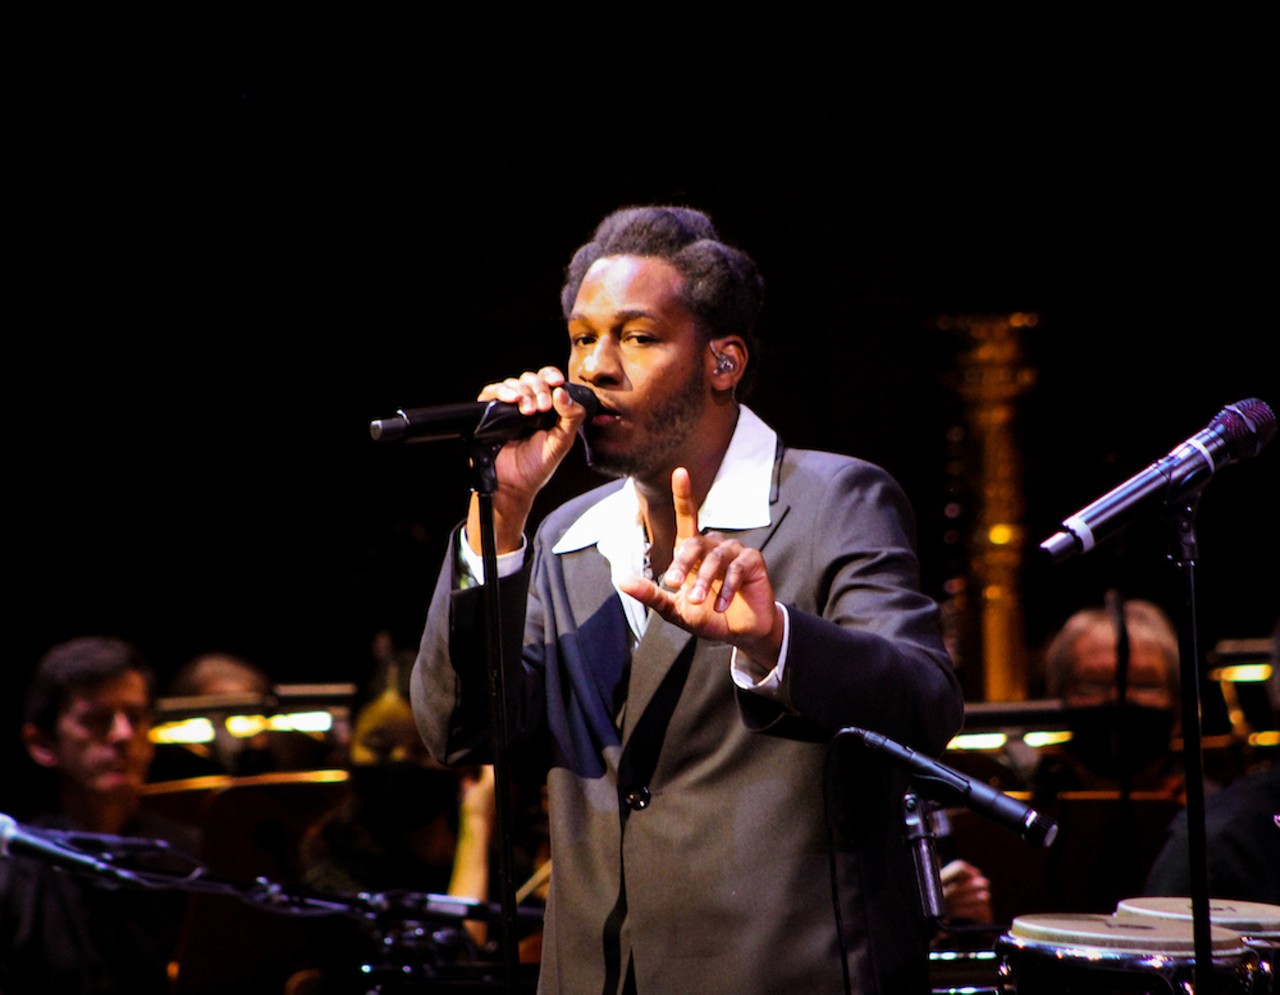 Leon Bridges holds court at Orlando's Steinmetz Hall with the Royal Philharmonic Orchestra